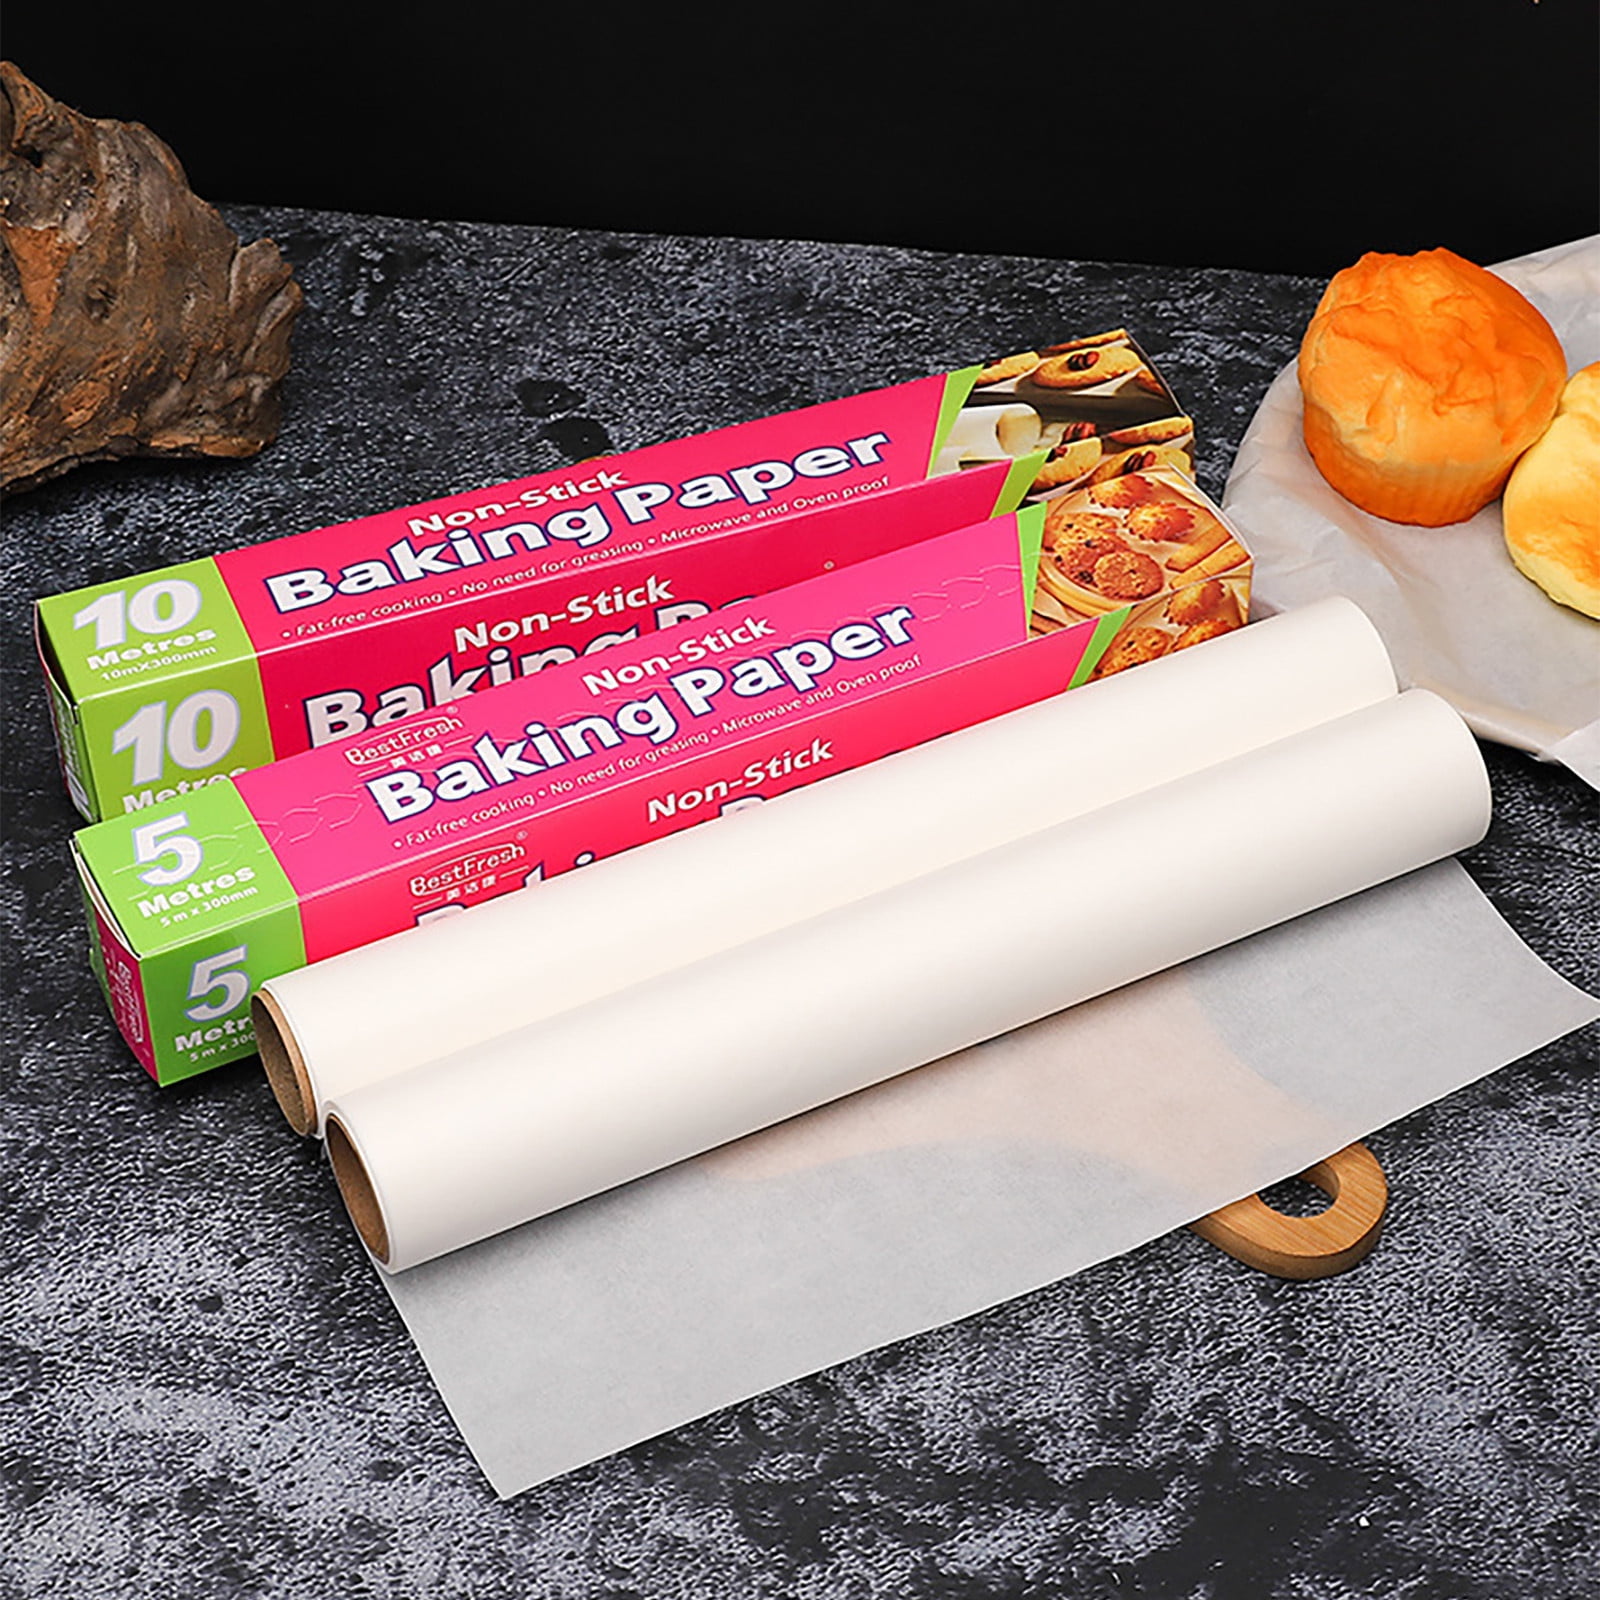 Kitchens Parchment Paper Roll, 12in x 66 ft, 65 Square Feet - Non-Stick Parchment Paper for Baking, Cooking, Grilling, Air Fryer and Steaming, YF03